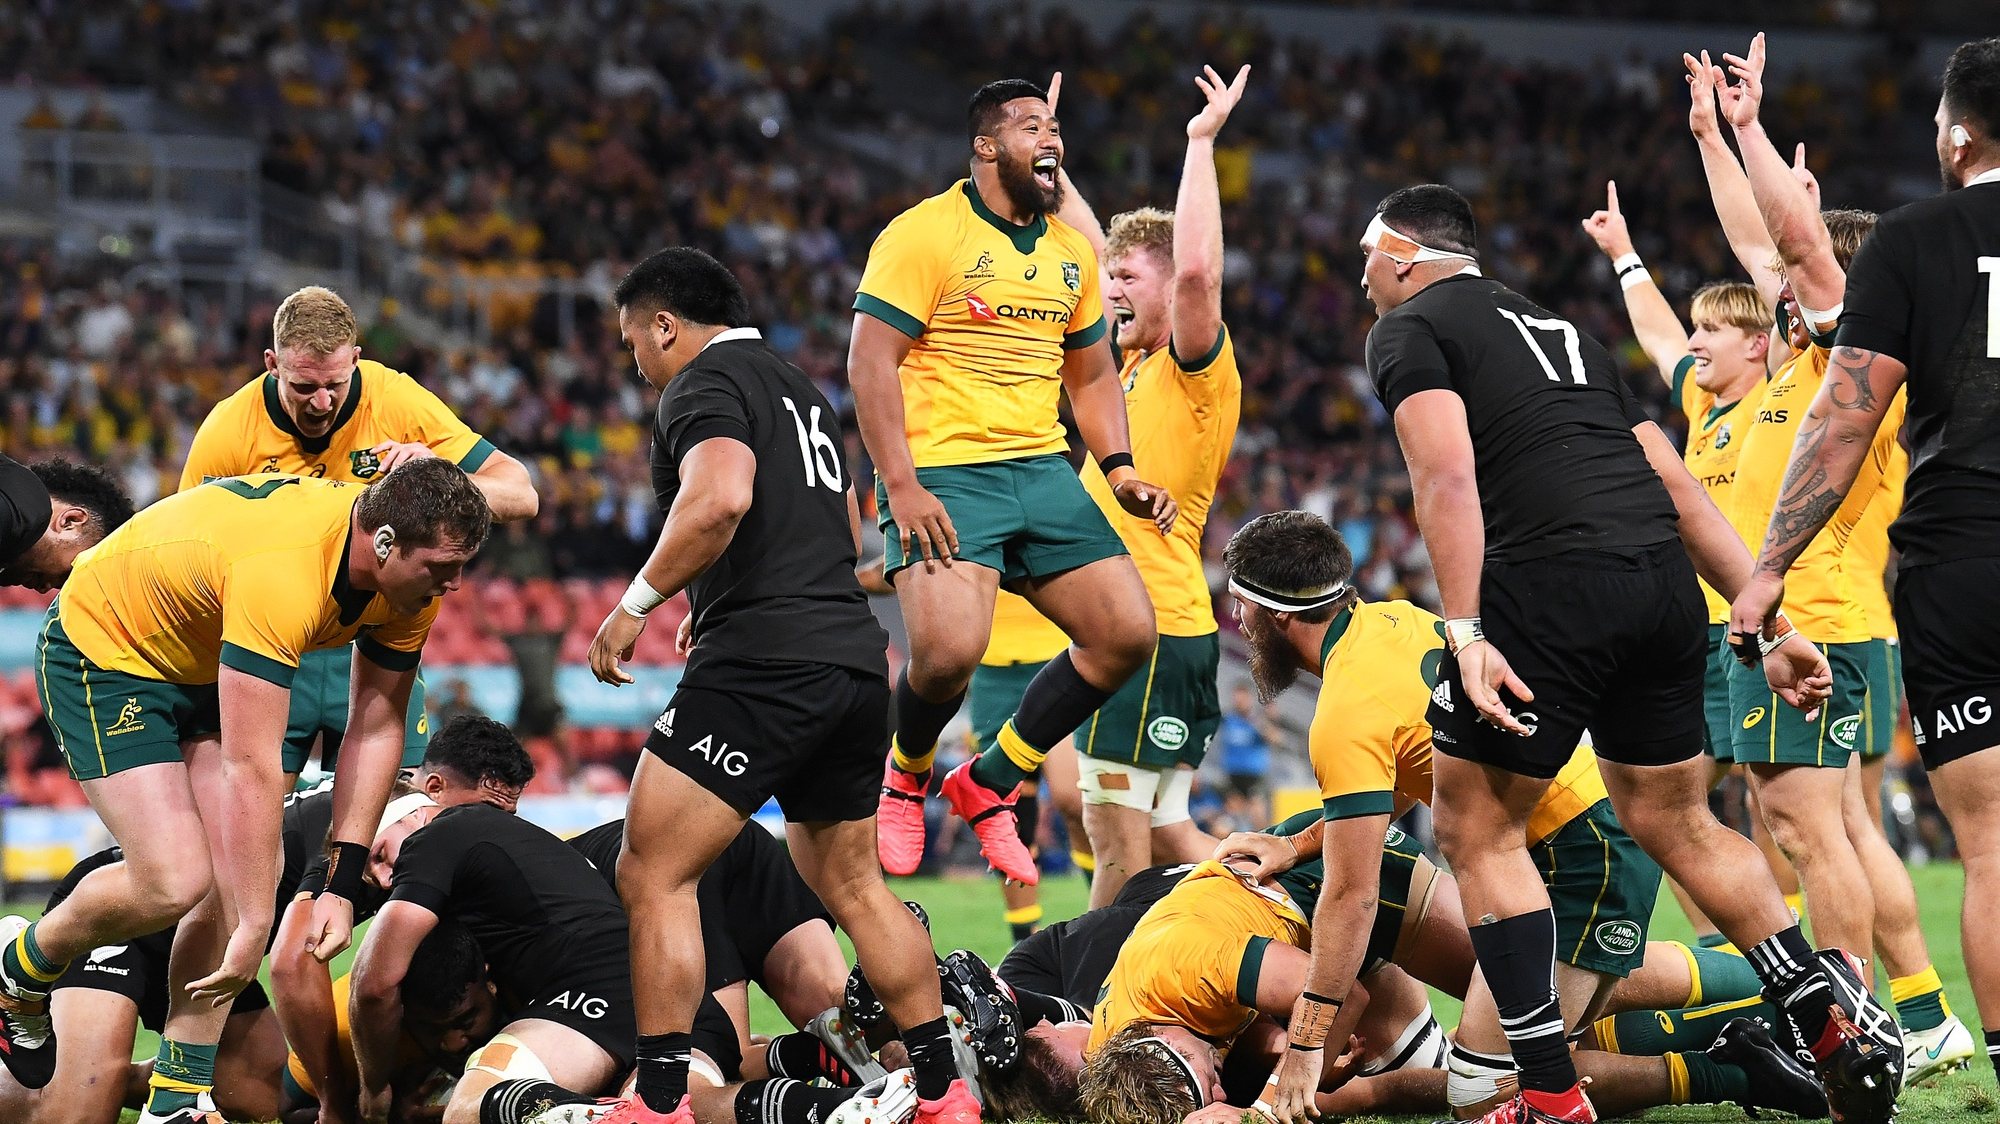 epa08804288 Taniela Tupou (C) of the Wallabies celebrates after scoring a try during the Tri Nations rugby union match between the Australian Wallabies and the New Zealand All Blacks in Brisbane, Australia, 07 November 2020.  EPA/DAVE HUNT AUSTRALIA AND NEW ZEALAND OUT